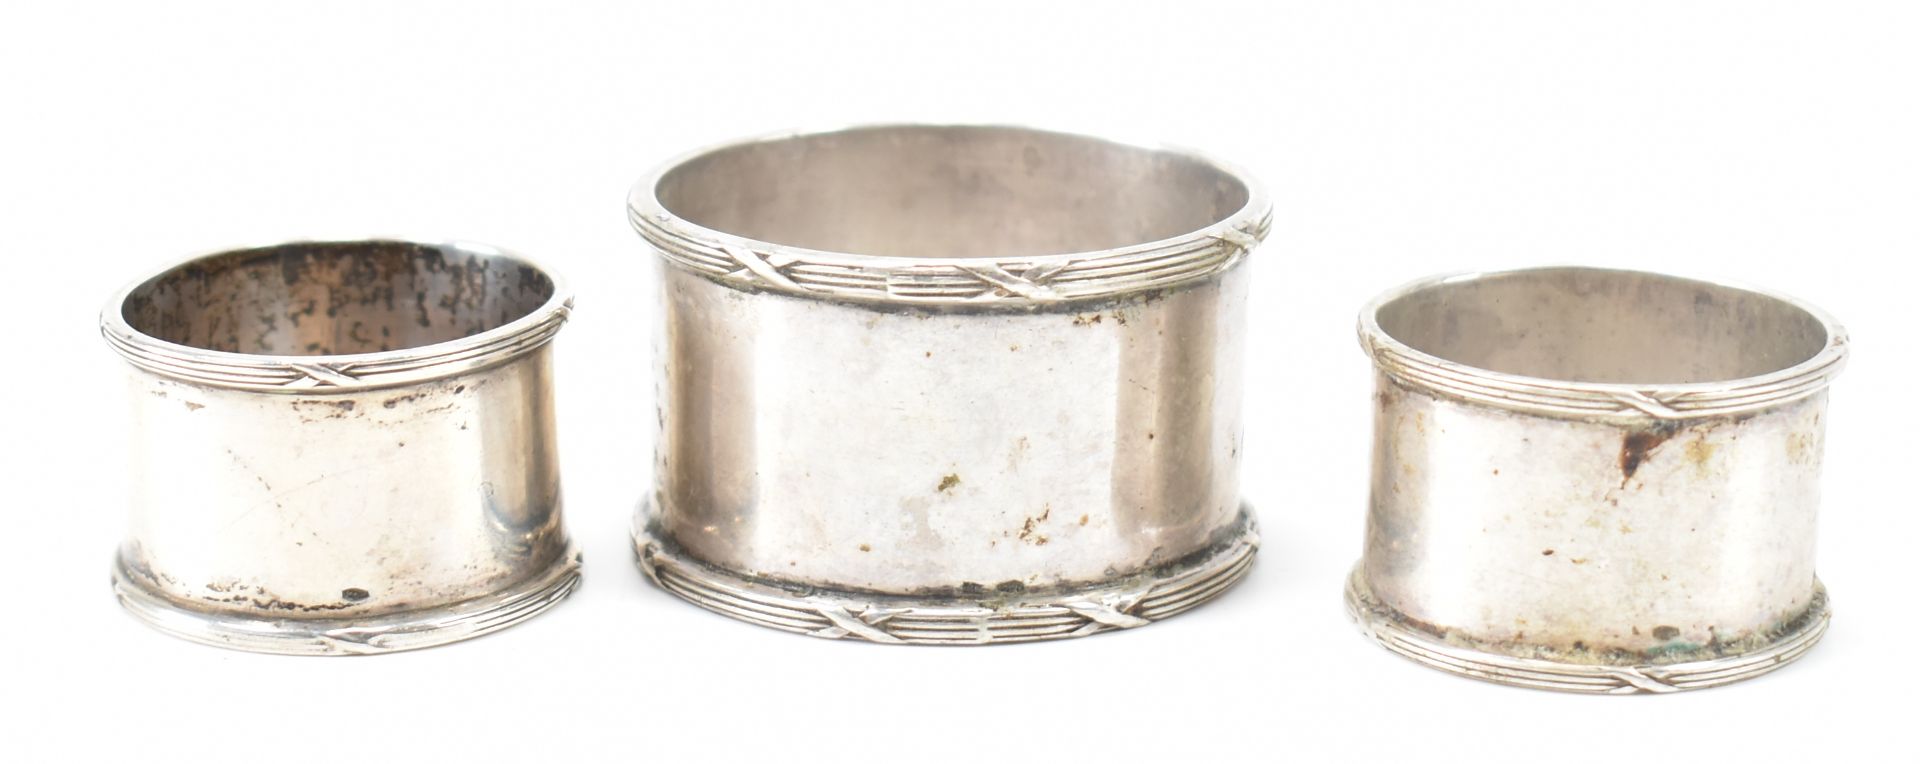 THREE ANTIQUE AUSTRO HUNGARIAN SILVER NAPKIN RINGS - Image 2 of 3